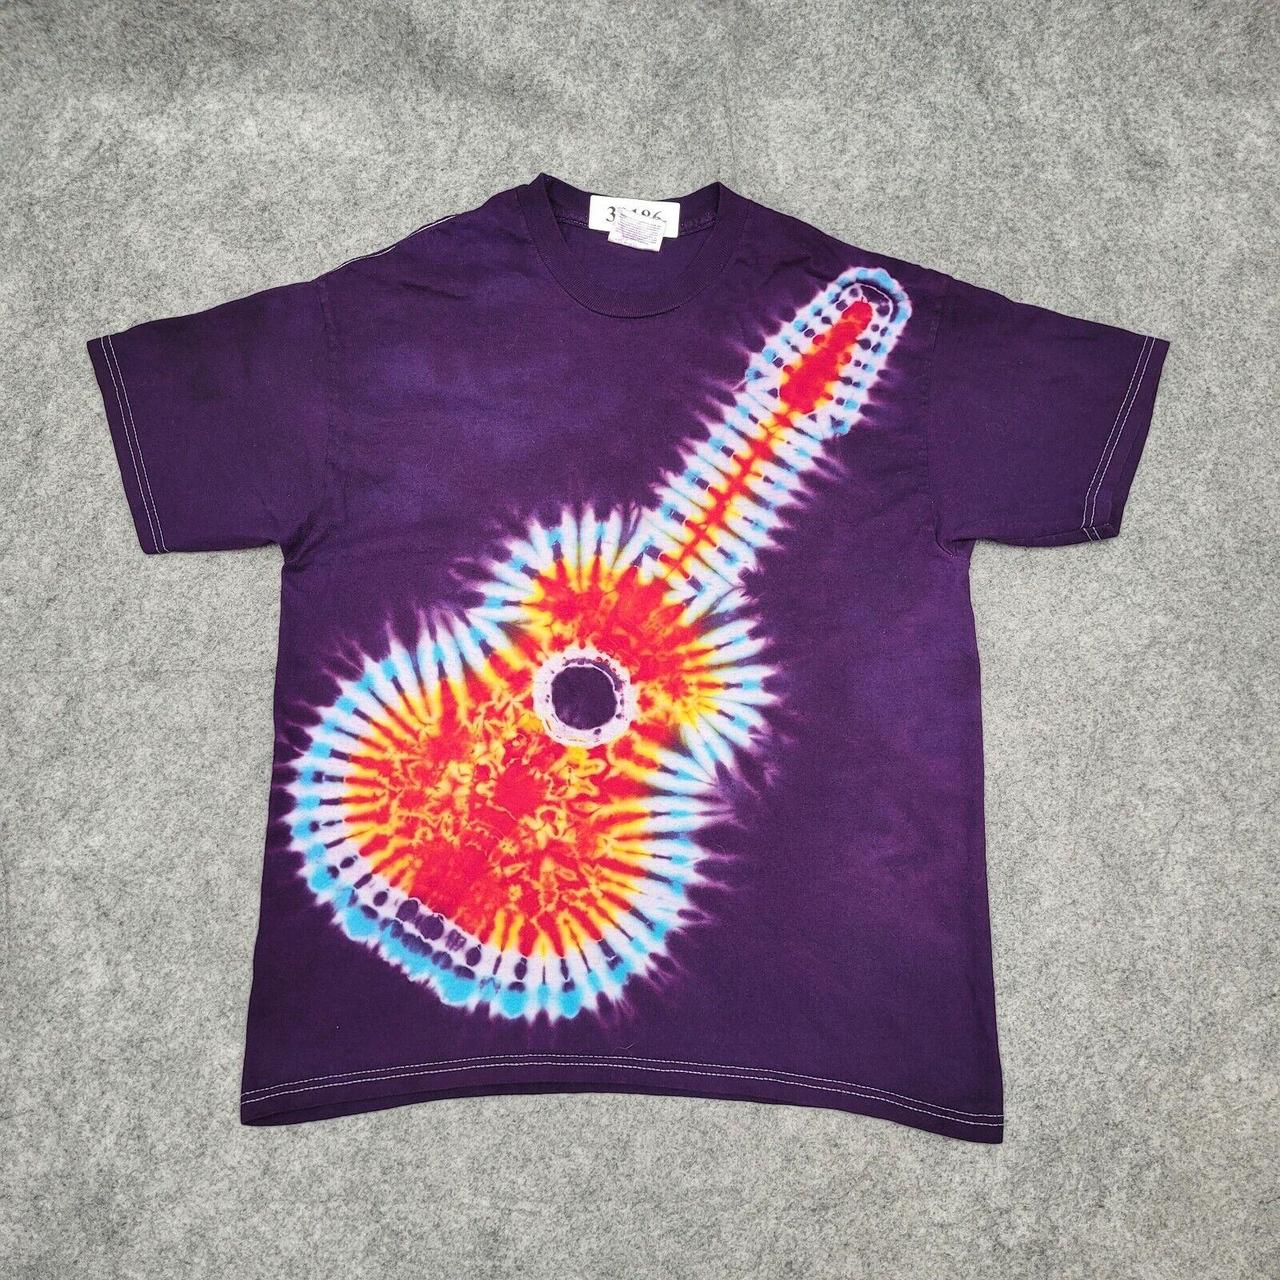 Vintage Guitar T-Shirt Depop Tie-Dye - Psychedelic Youth XL...